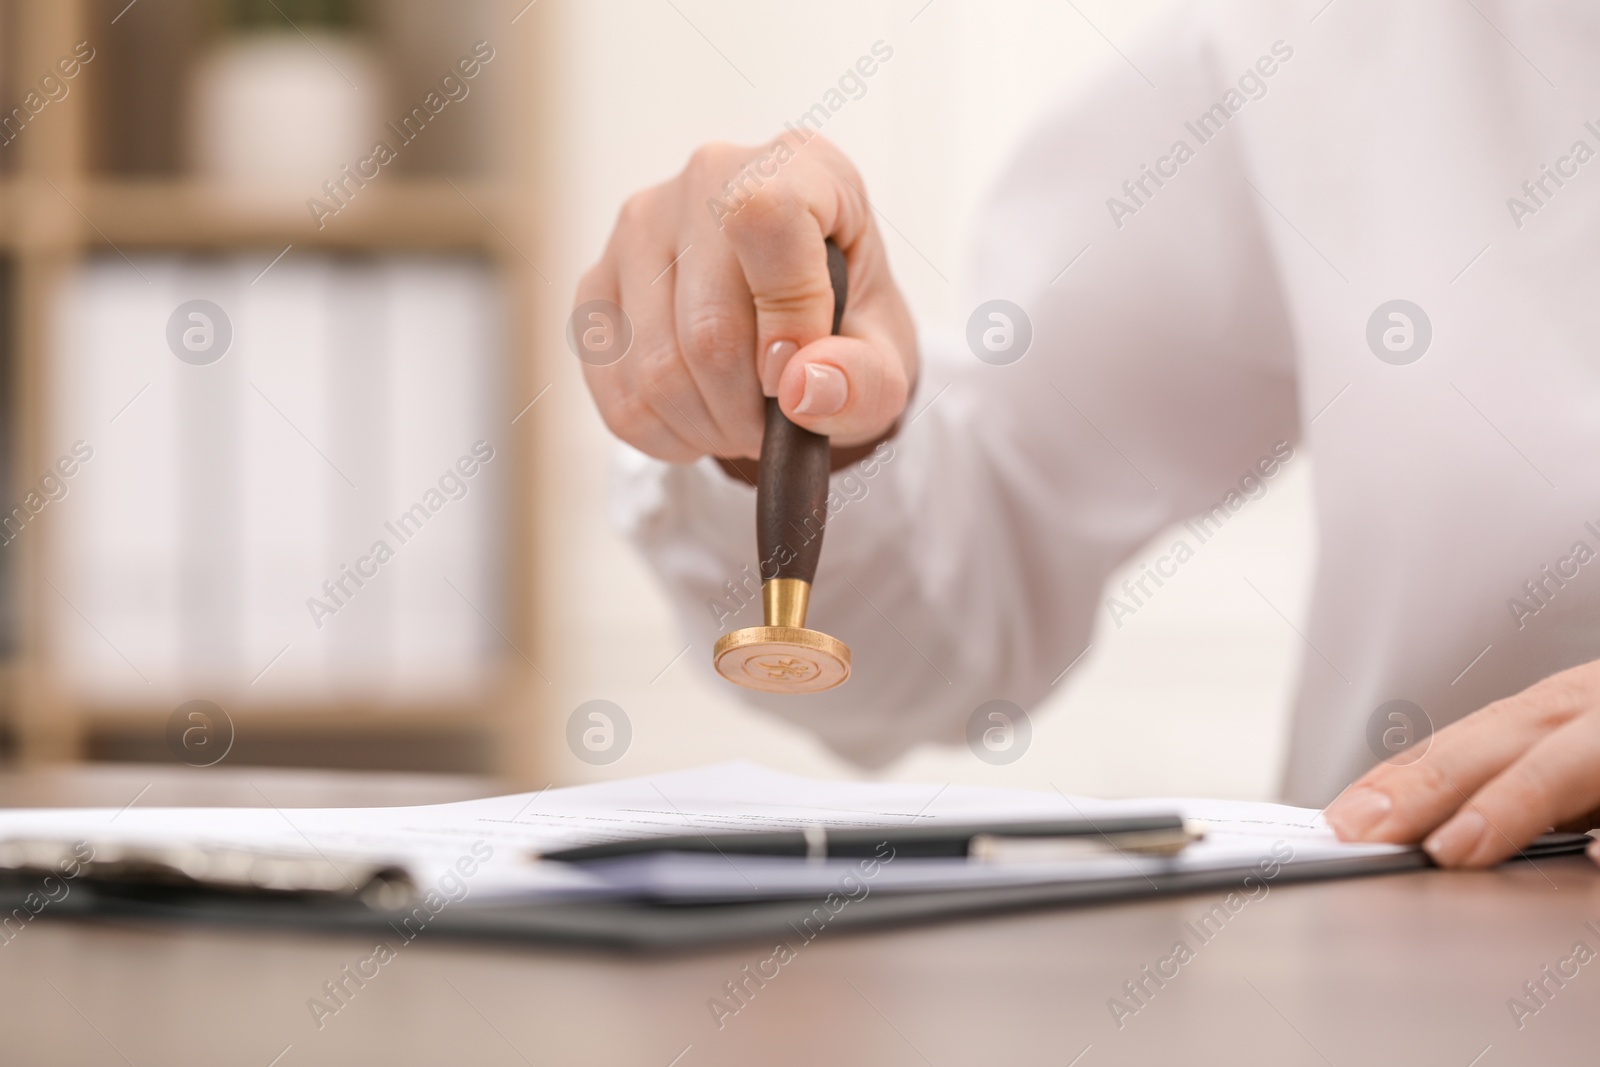 Photo of Woman stamping document at table, closeup view